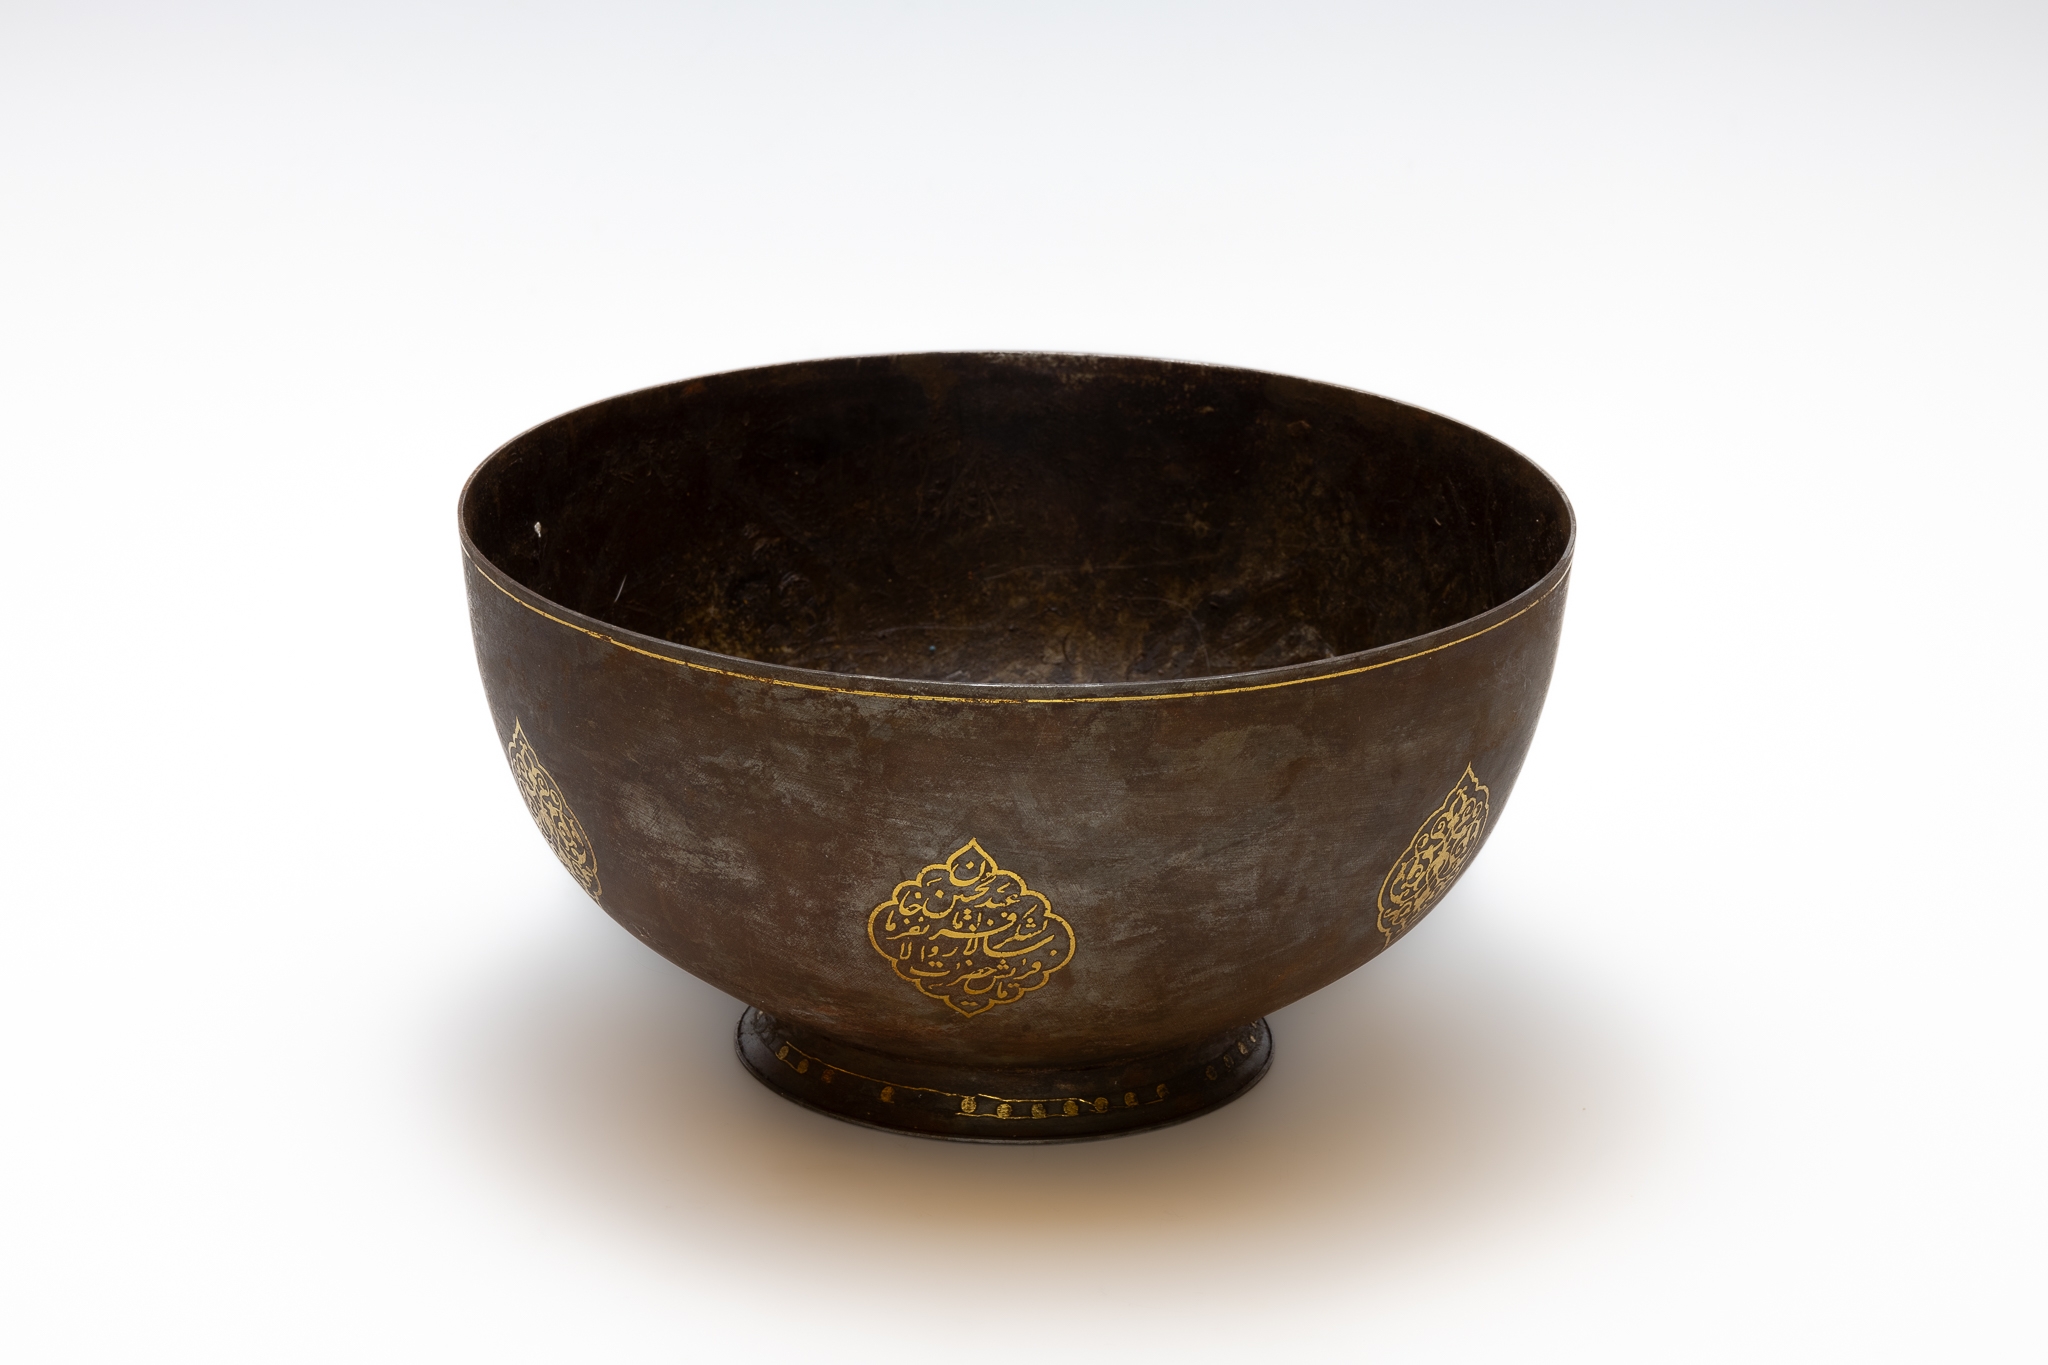 An Islamic Qajar Bowl with Islamic Calligraphy in Gold Inlay.

Approximately 23 x 12cm 